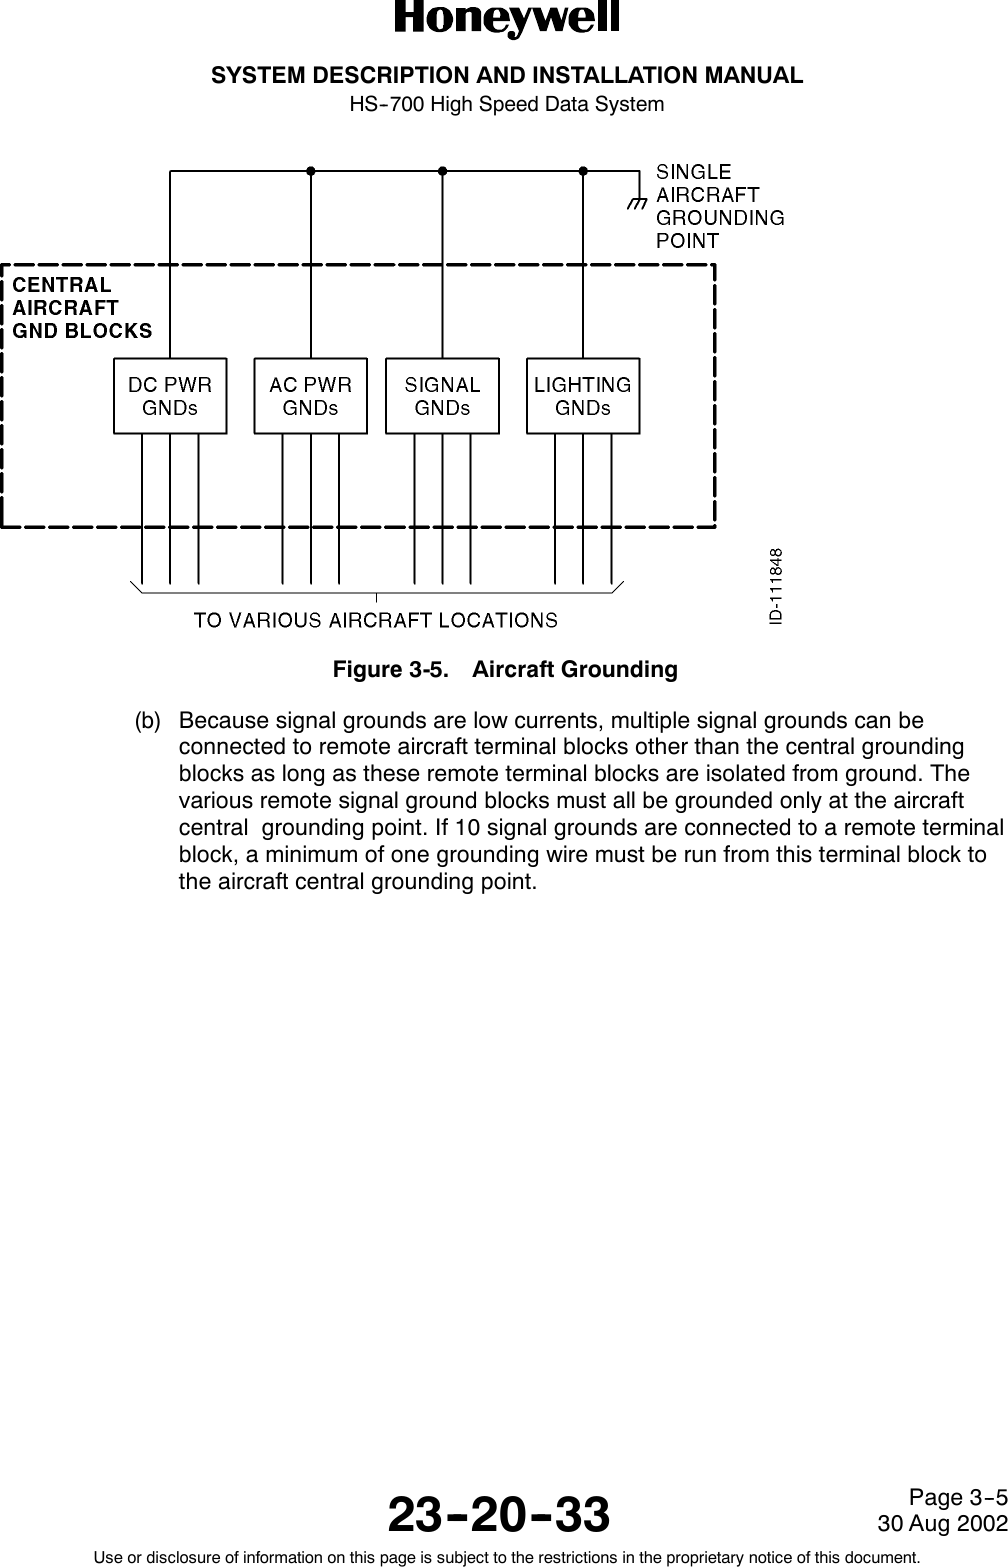 SYSTEM DESCRIPTION AND INSTALLATION MANUALHS--700 High Speed Data System23--20--3330 Aug 2002Use or disclosure of information on this page is subject to the restrictions in the proprietary notice of this document.Page 3--5Figure 3-5. Aircraft Grounding(b) Because signal grounds are low currents, multiple signal grounds can beconnected to remote aircraft terminal blocks other than the central groundingblocks as long as these remote terminal blocks are isolated from ground. Thevarious remote signal ground blocks must all be grounded only at the aircraftcentral grounding point. If 10 signal grounds are connected to a remote terminalblock, a minimum of one grounding wire must be run from this terminal block tothe aircraft central grounding point.